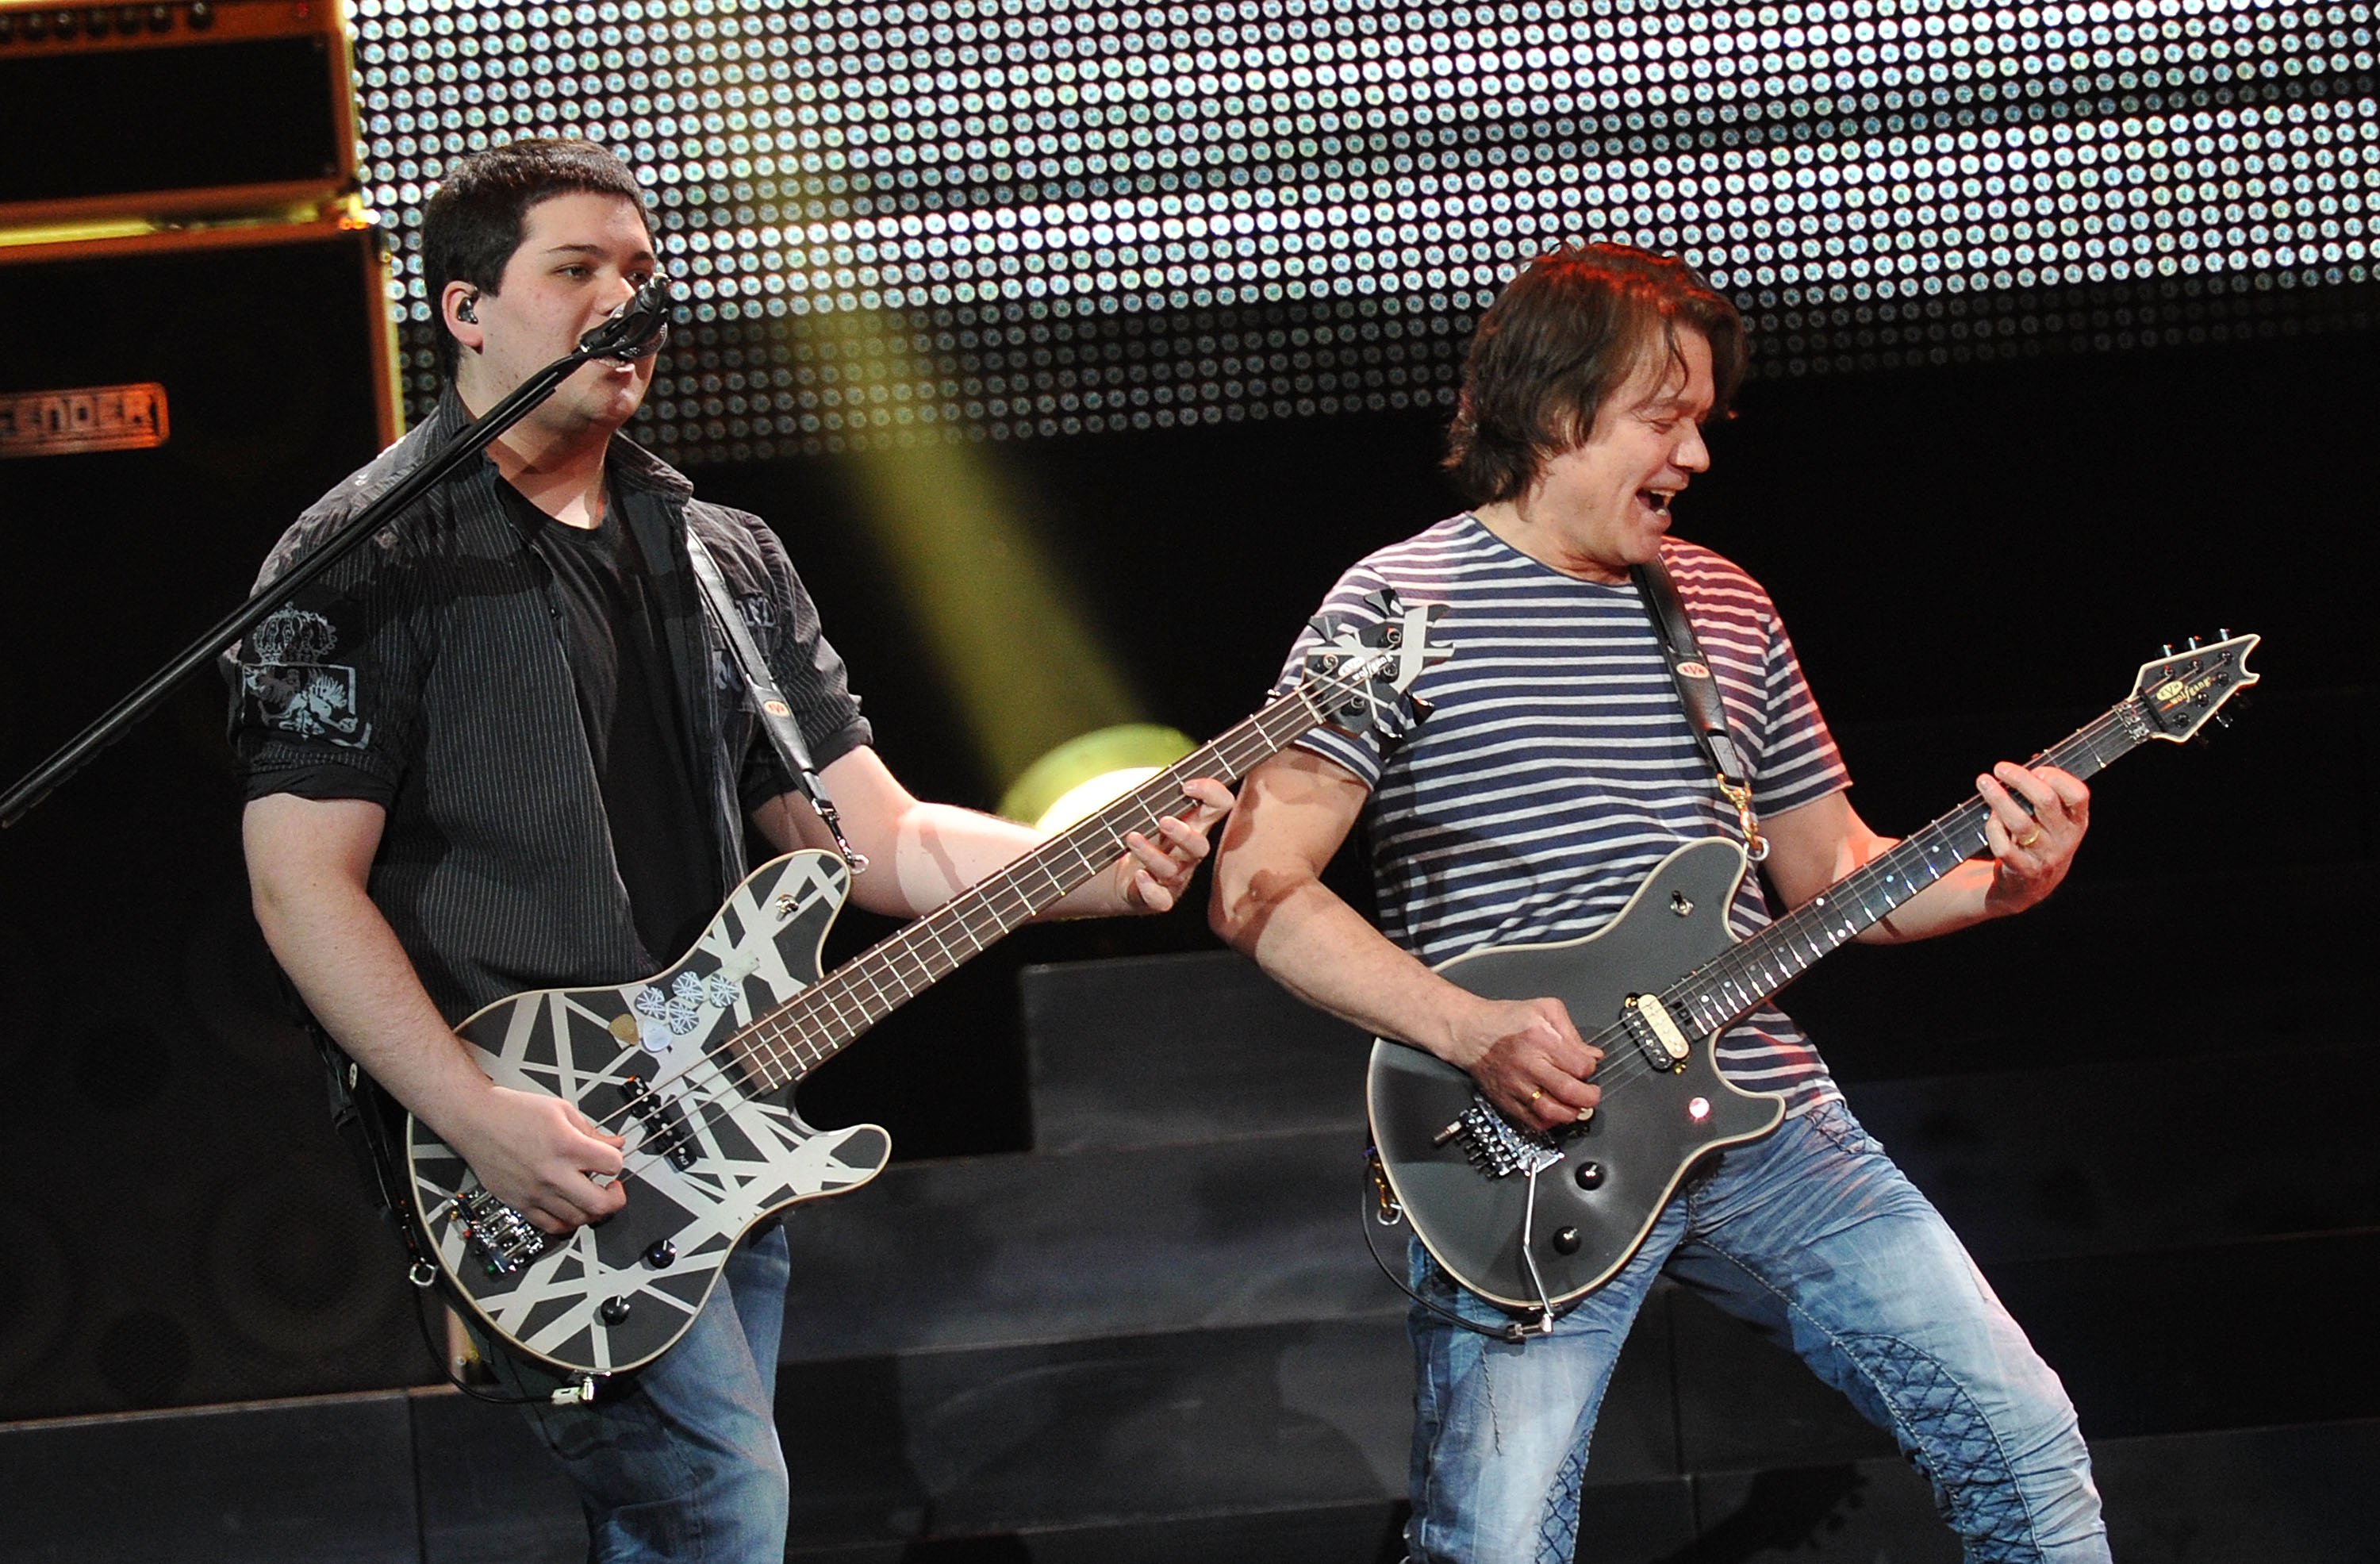 Wolfgang Van Halen and Eddie Van Halen perform at Madison Square Garden on March 1, 2012, in New York City. | Source: Getty Images